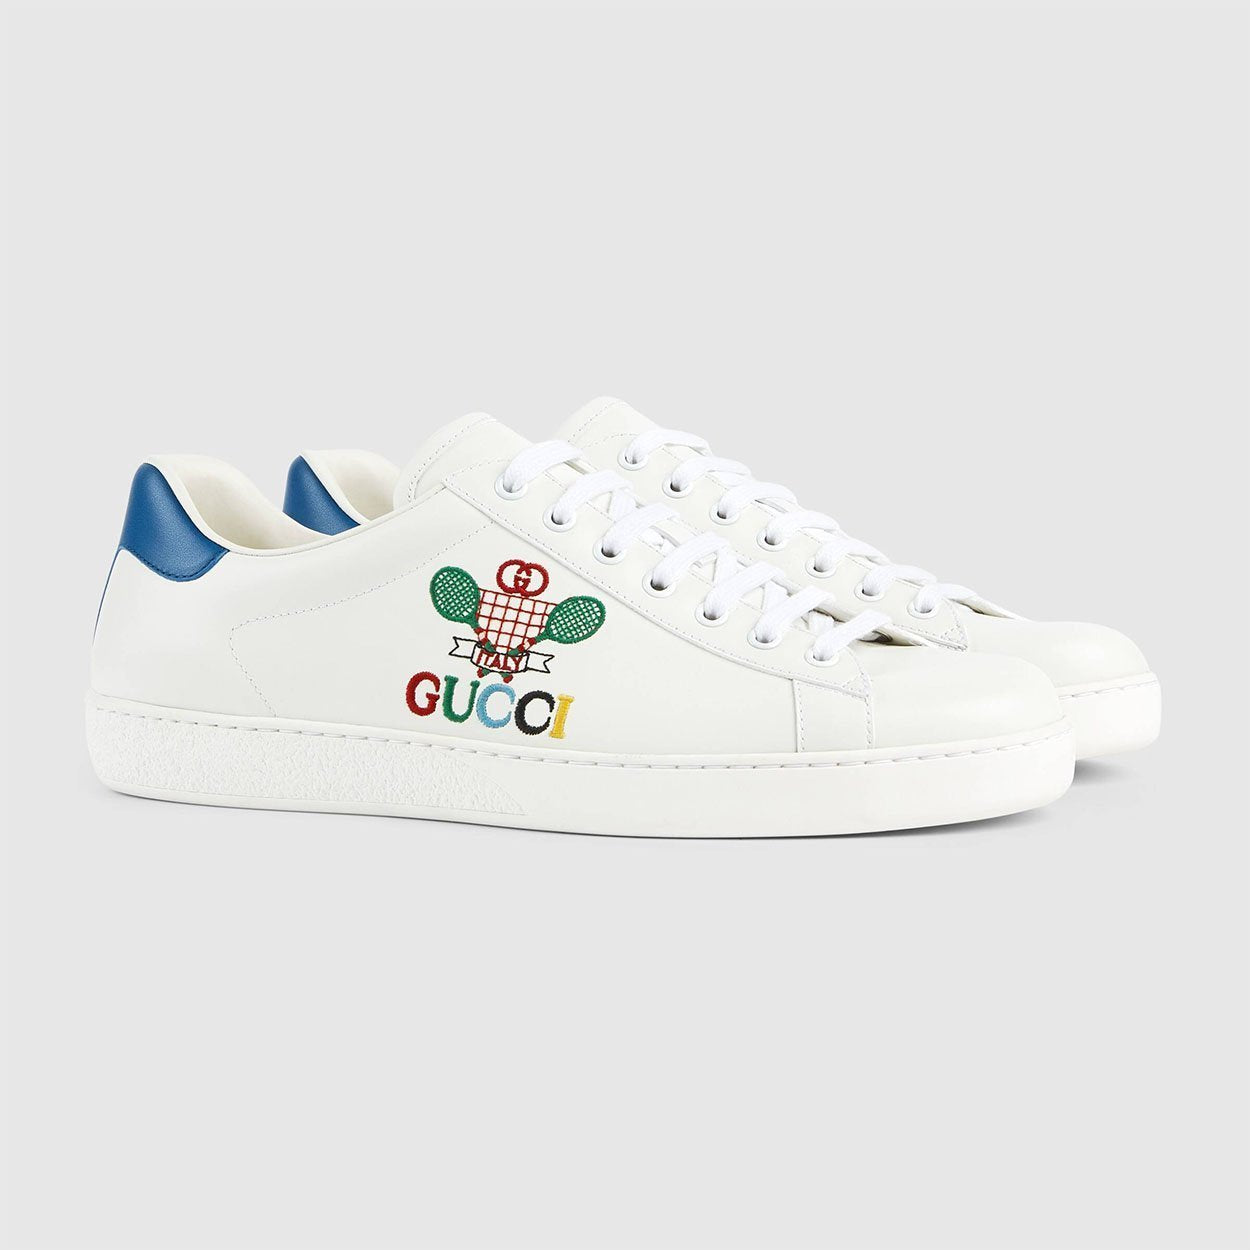 Gucci Ace Sneakers Tennis Men's Shoes White Tennis Sewed Calf-Skin Lea ...